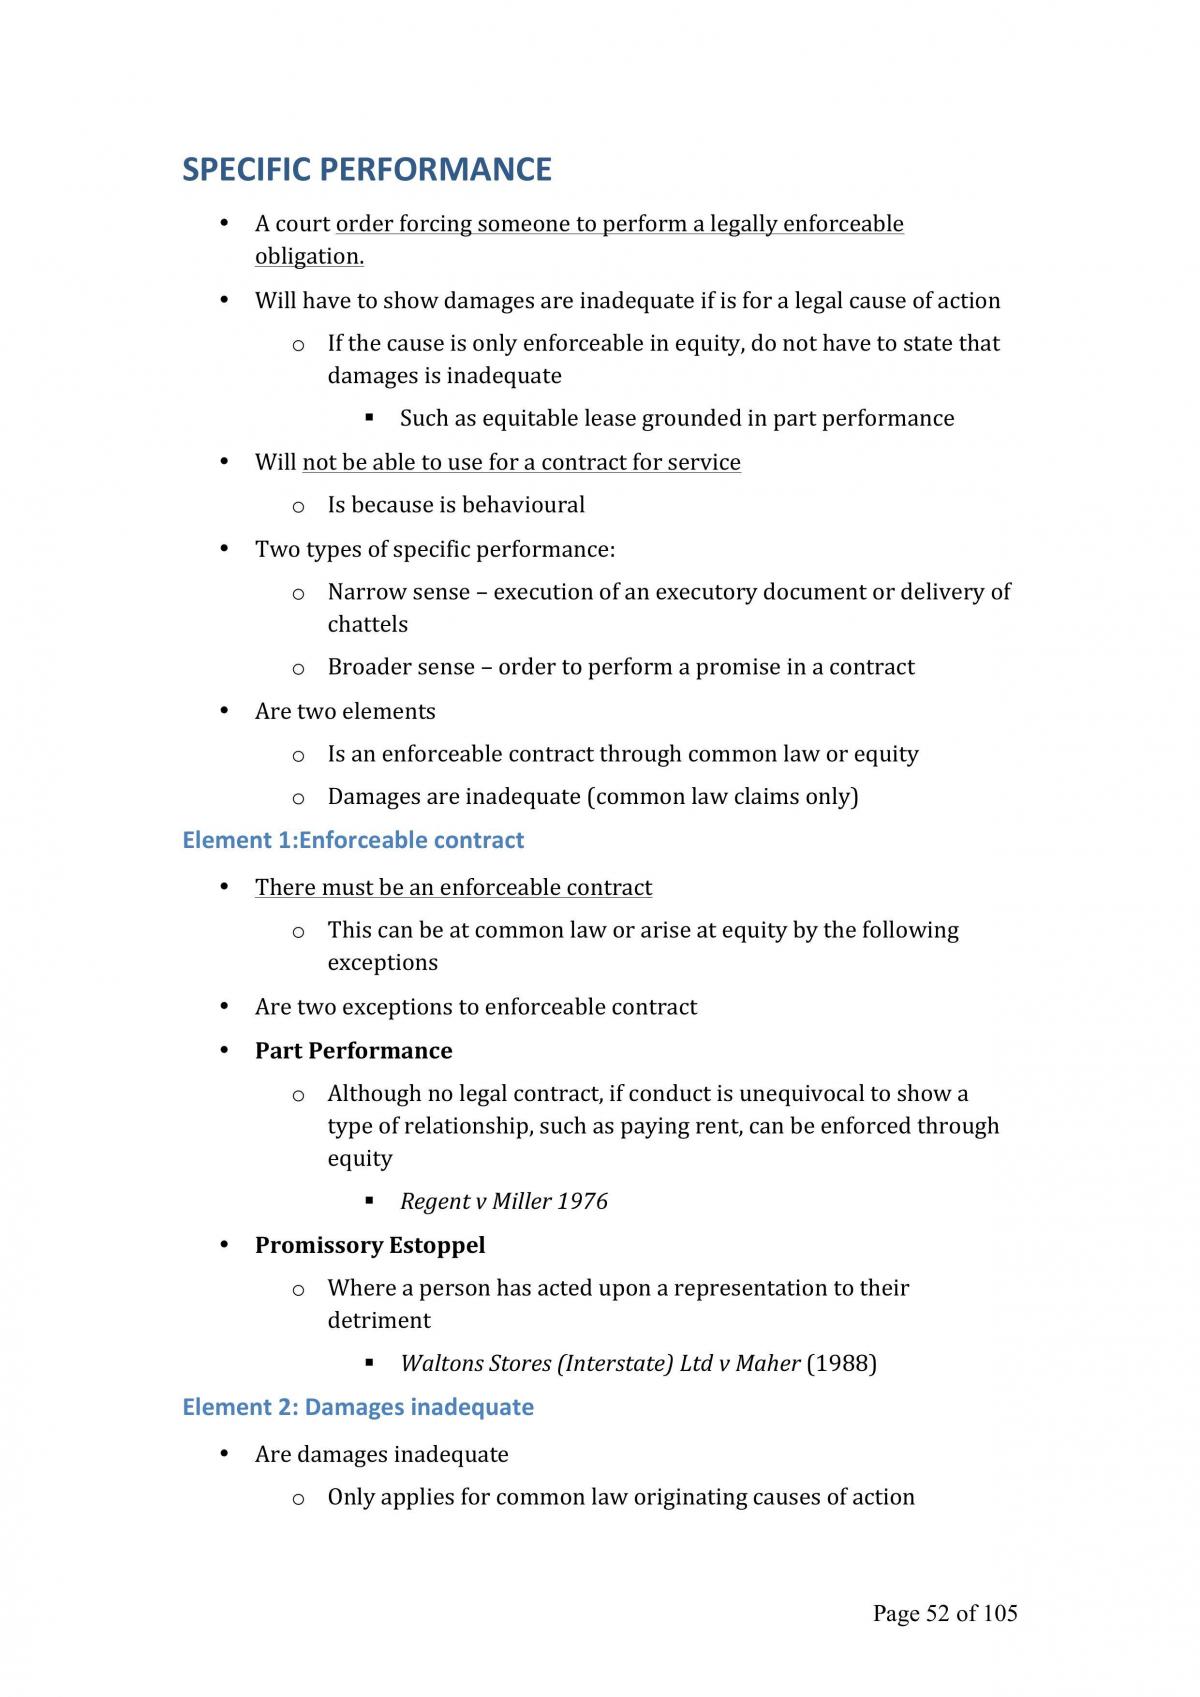 MLL405 Equity and Trusts Notes - Page 52